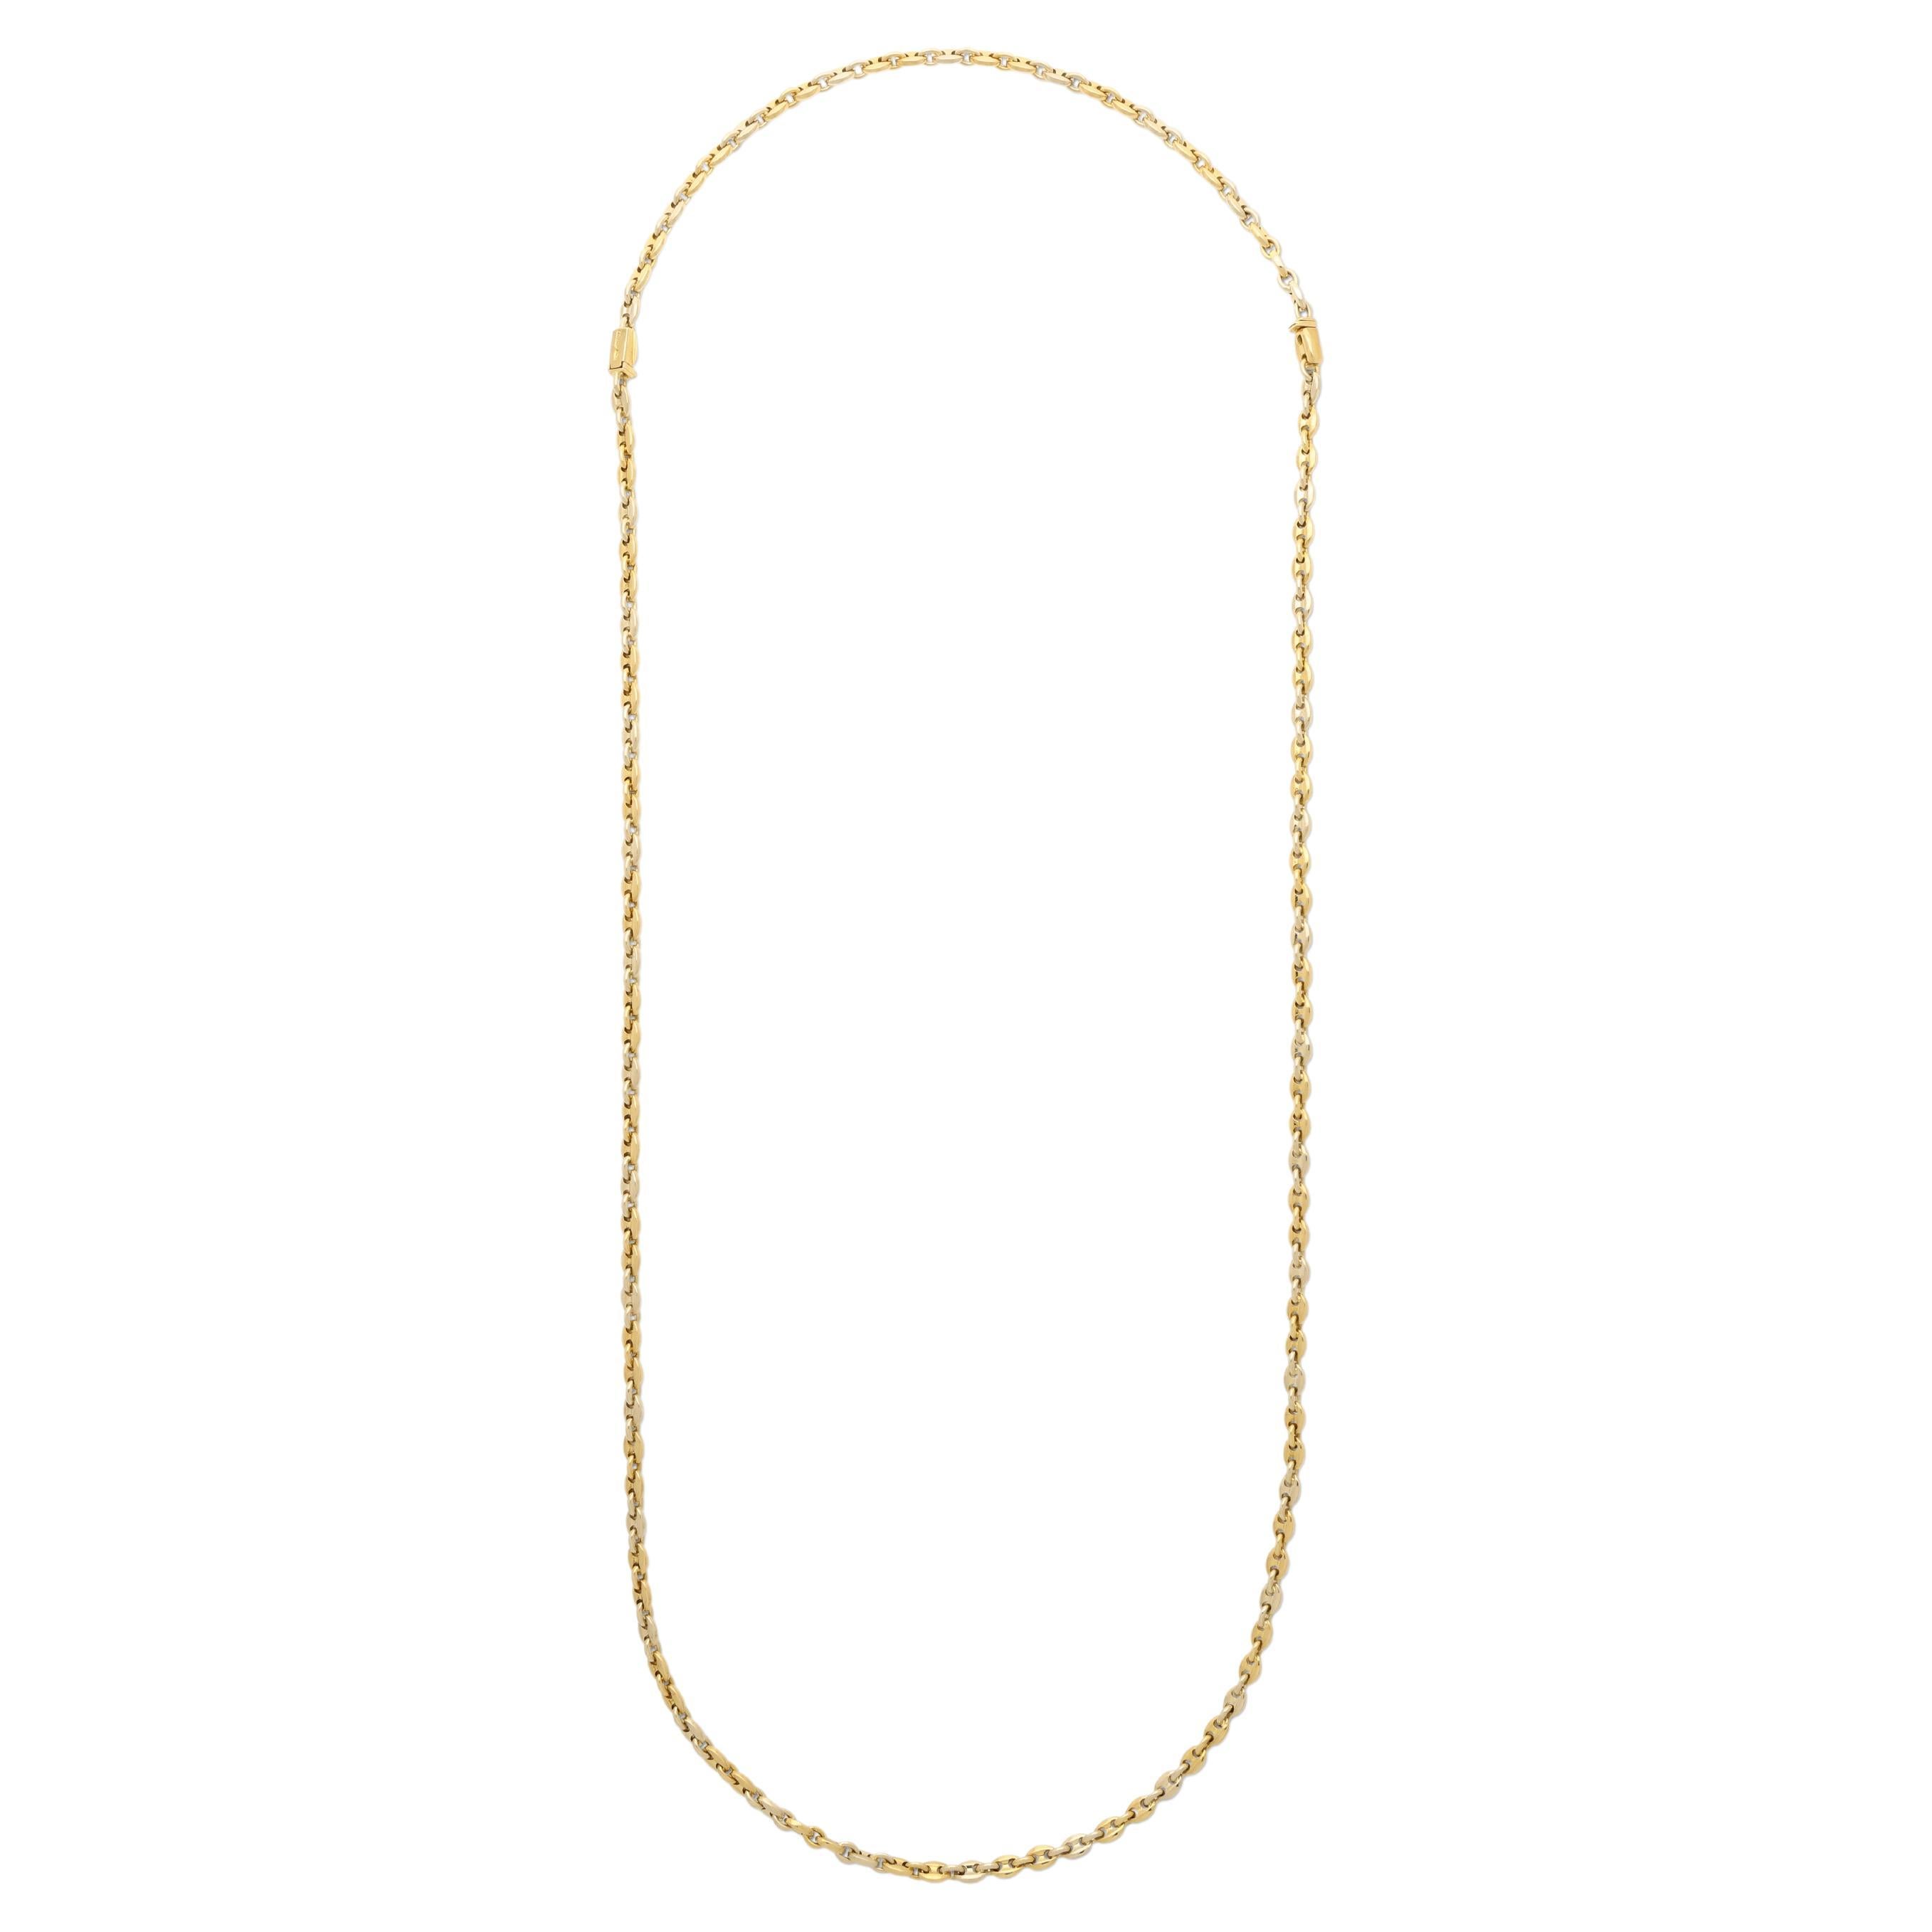 Cartier Two-Tone 18ct Gold Mariner Link Long Chain Necklace And Bracelet C1990s